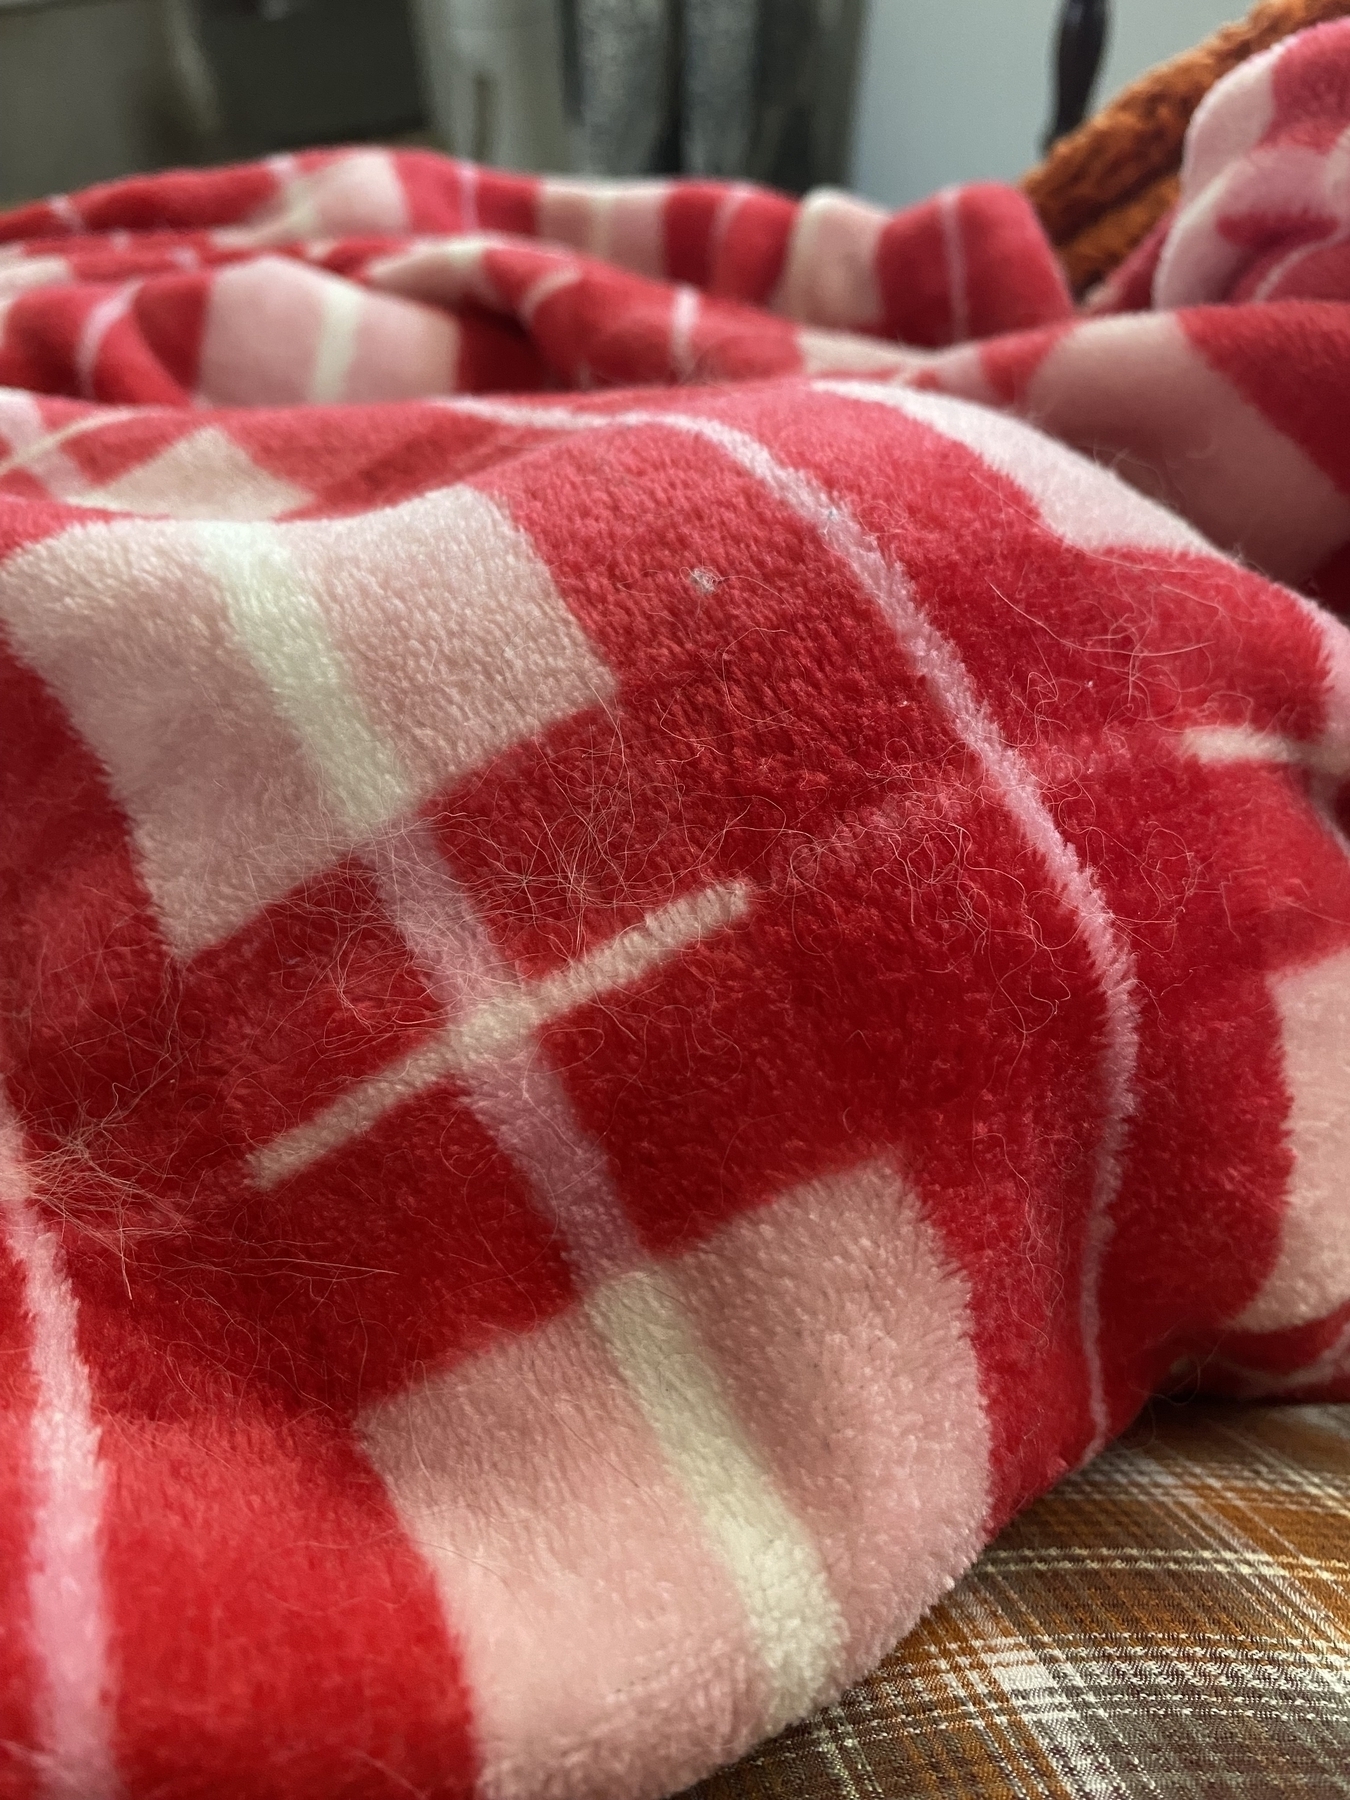 A blanket with white, pink, and dark pink stripes covering a kitty cat named Flynn.